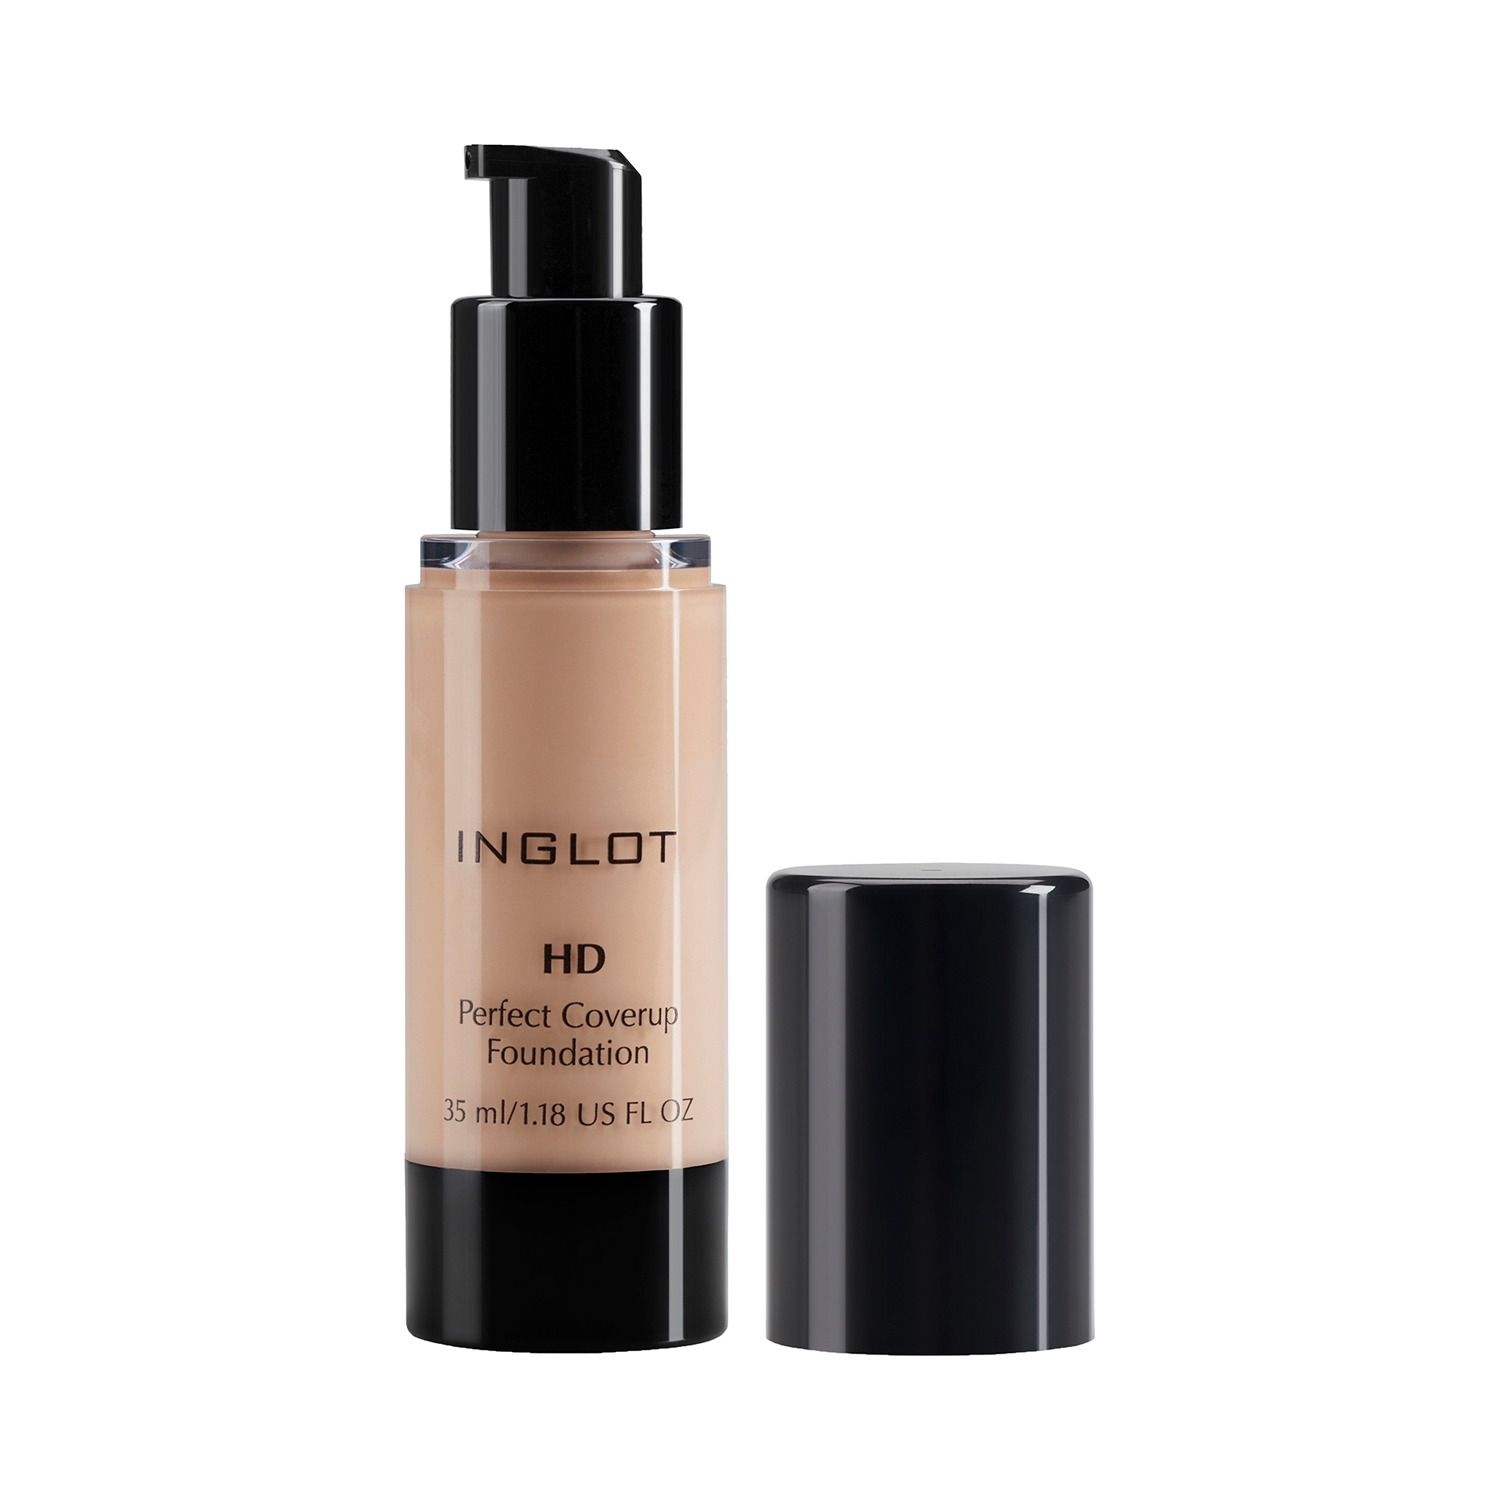 INGLOT | INGLOT HD Perfect Coverup Foundation - LW71 (30ml)